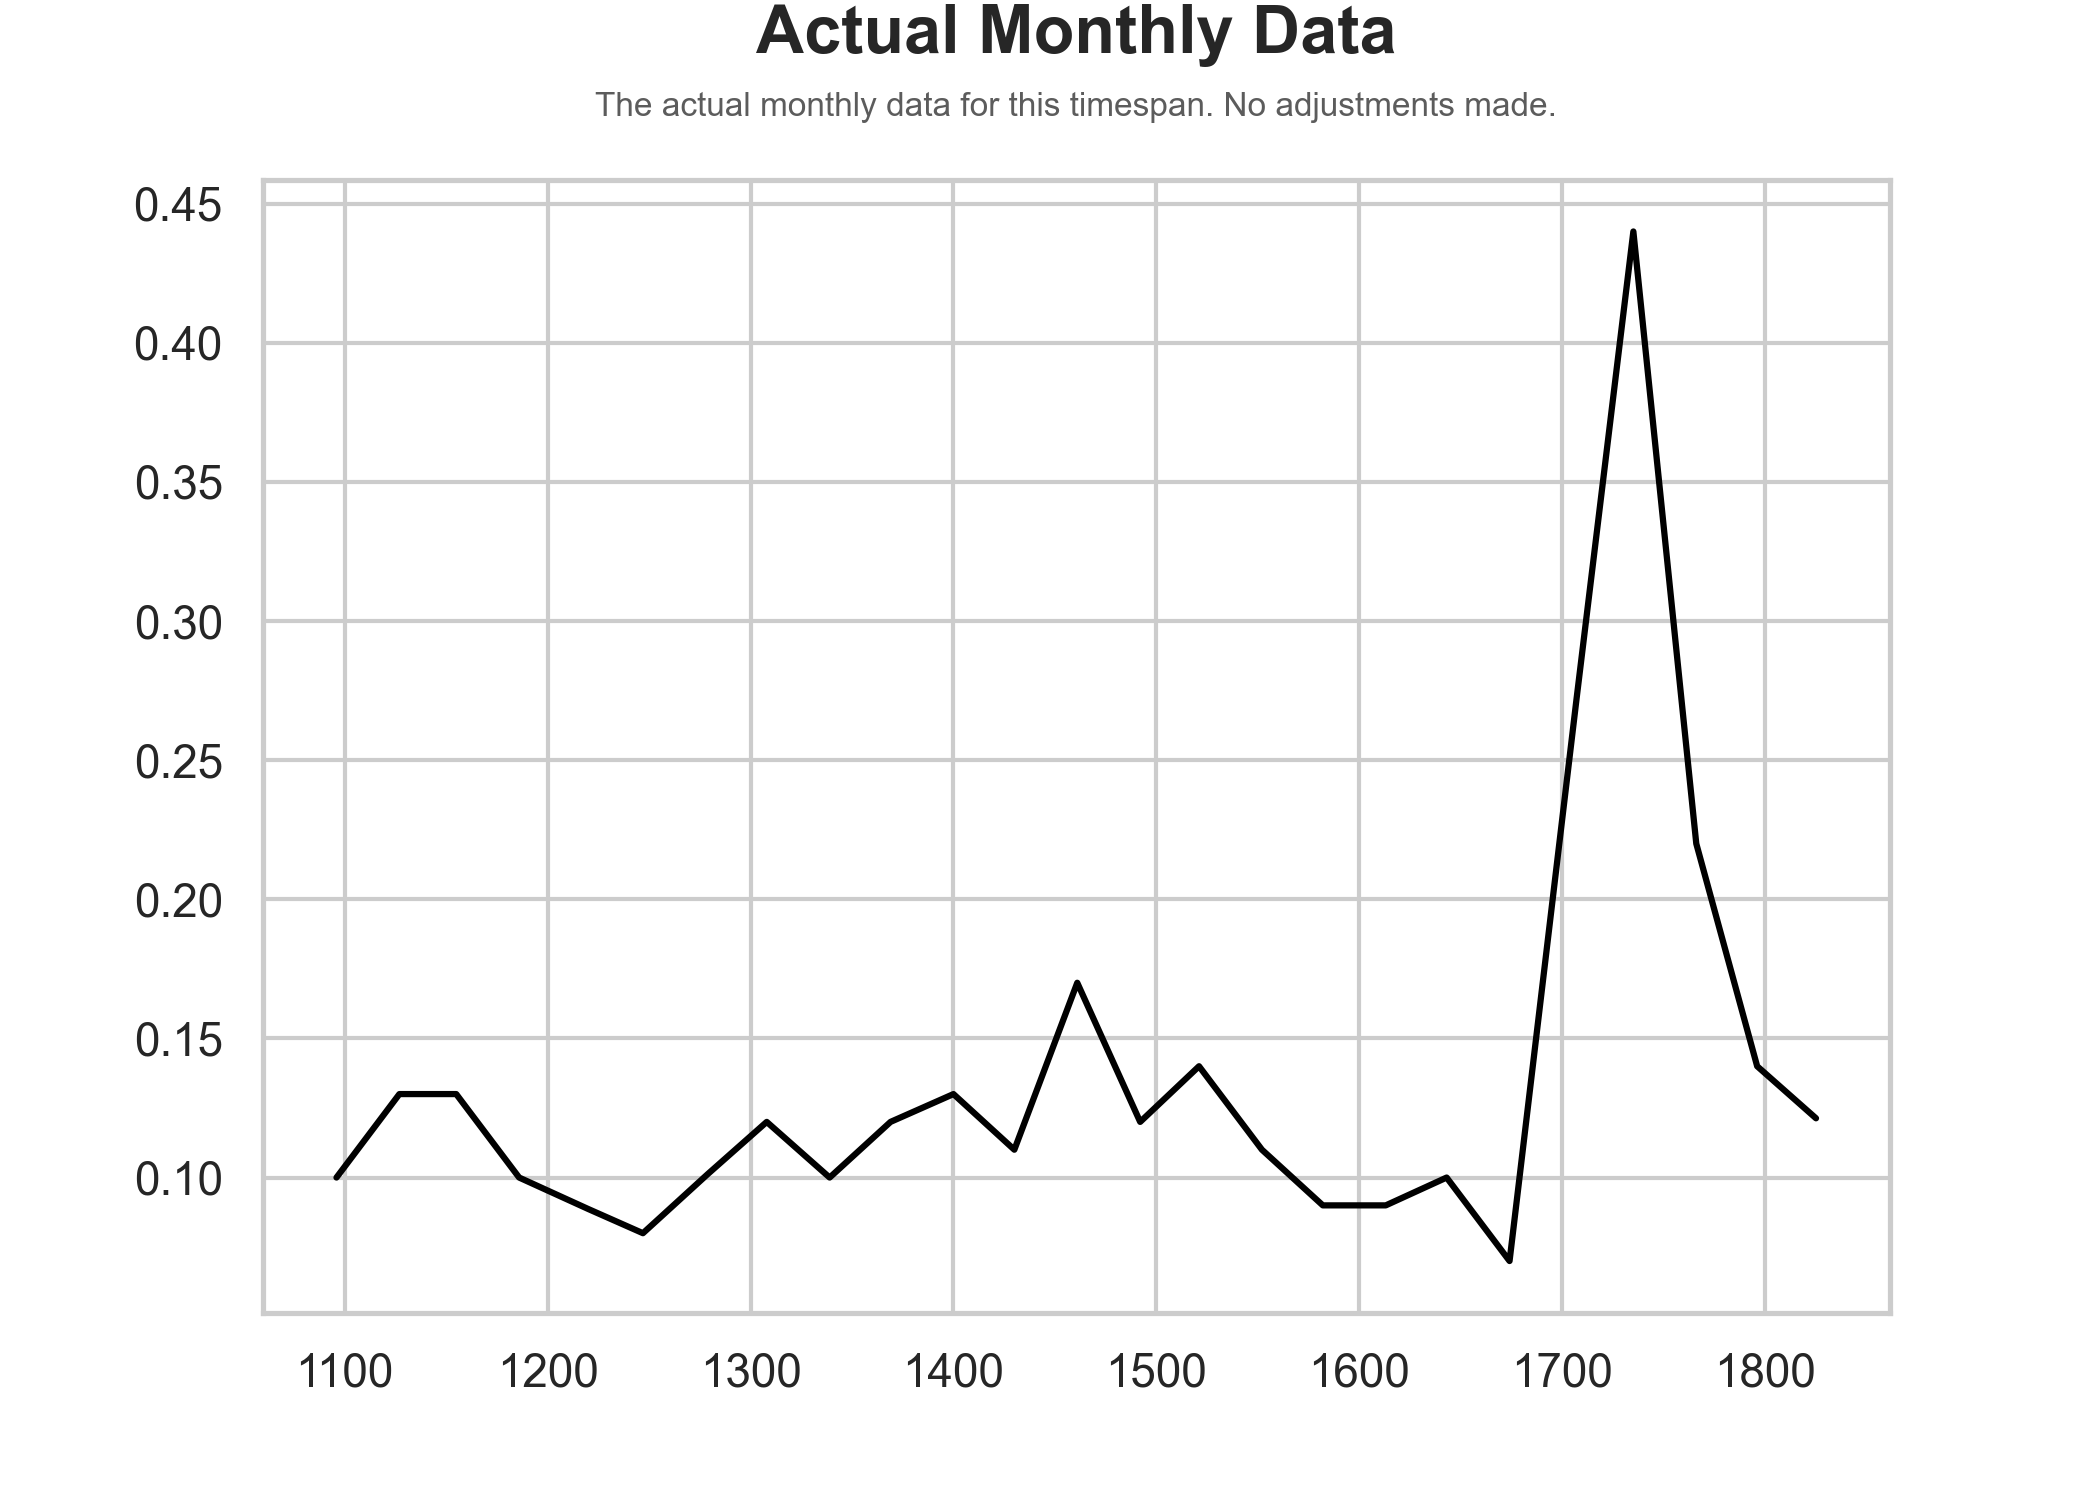 Actual monthly data.